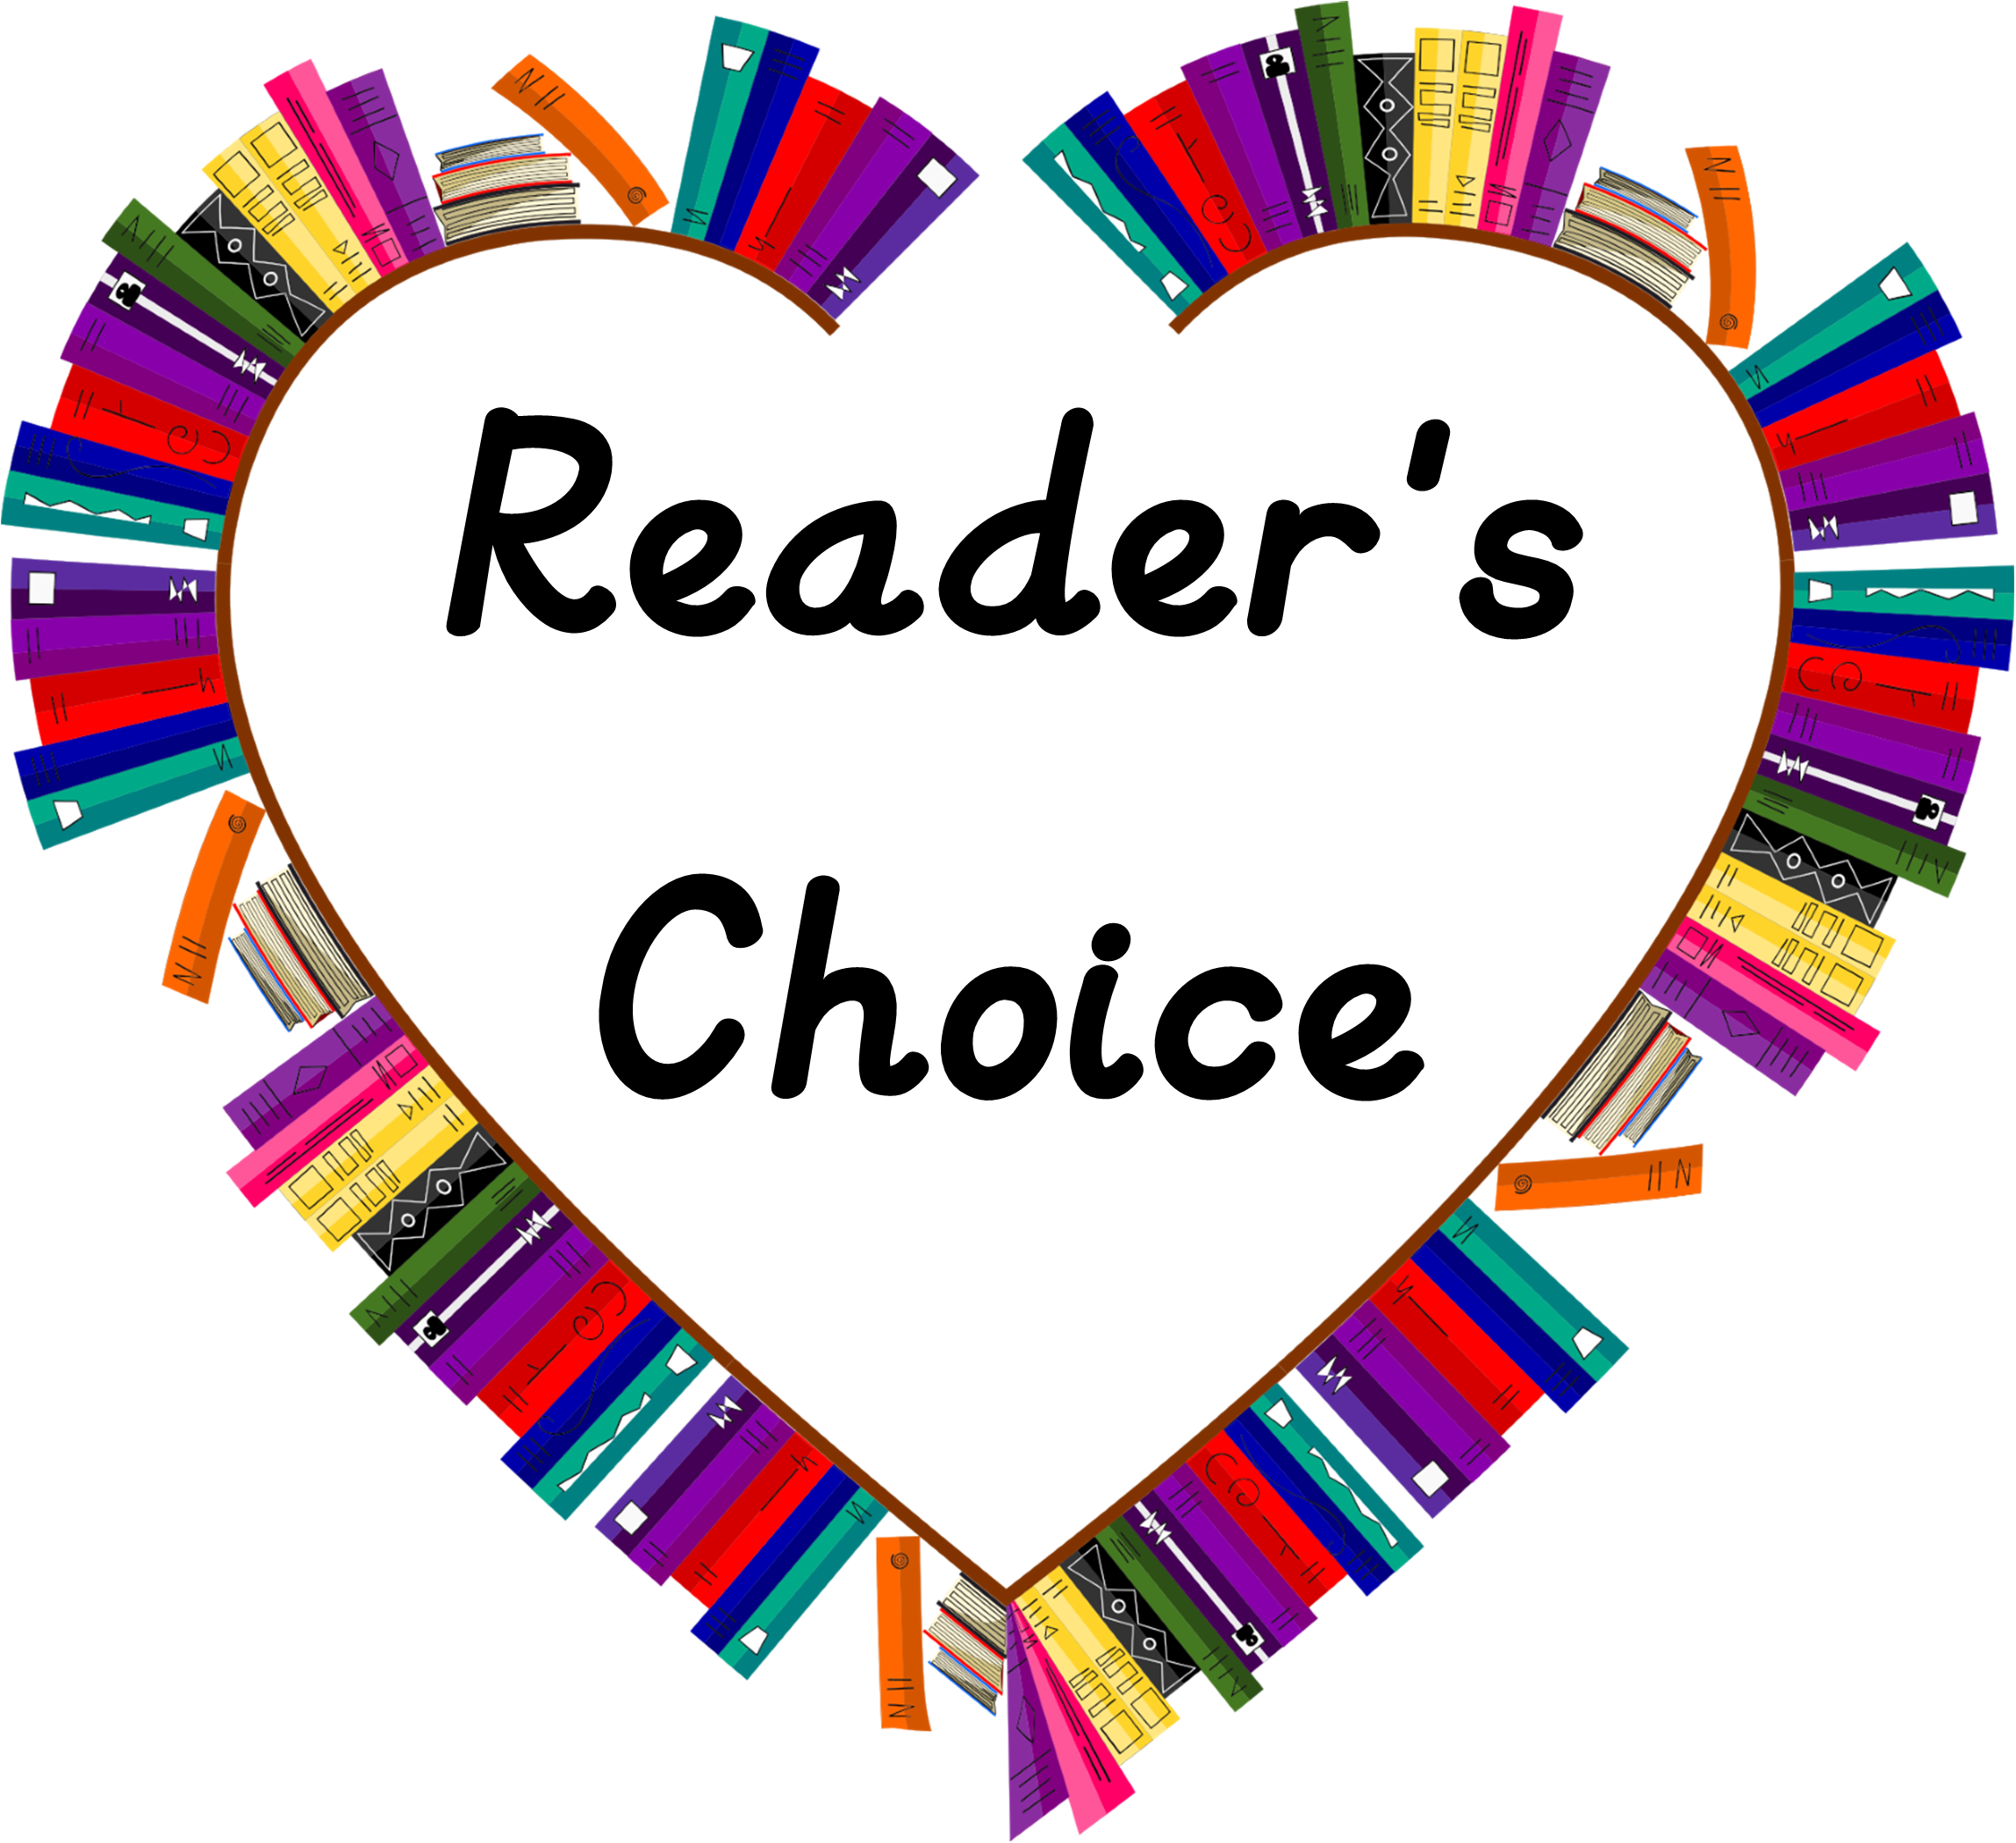 Illustration of books on shelves in the shape of a heart around the words Reader's Choice.